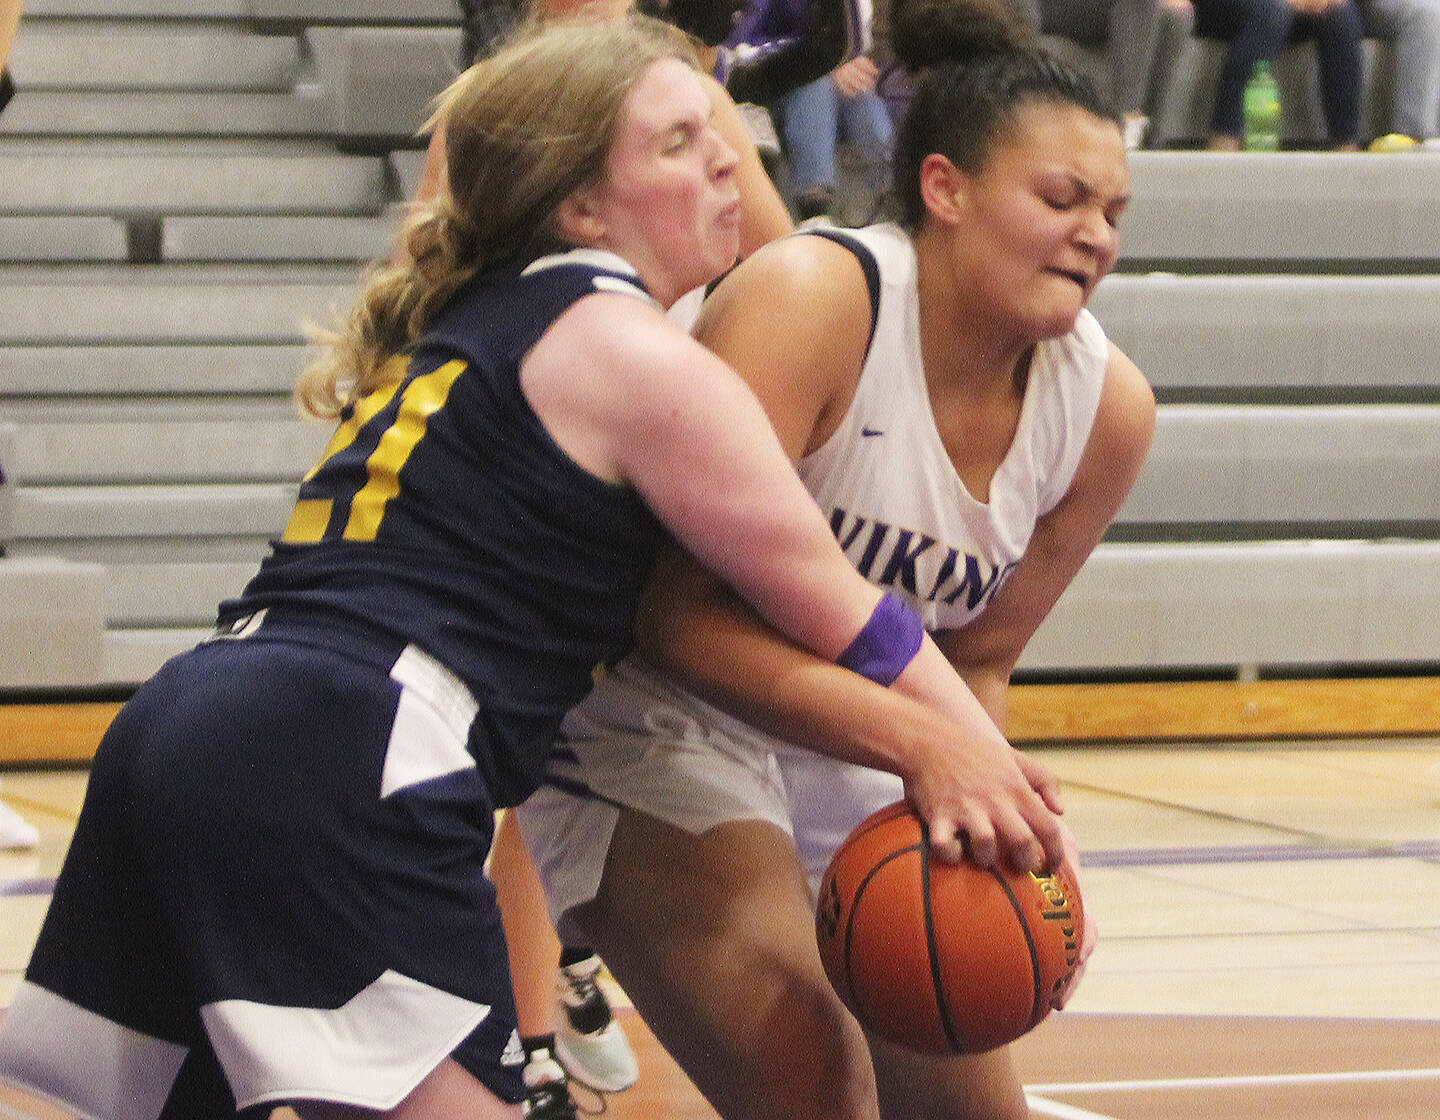 Maliyah Reed, right, fights with Ana Byers (21) of Bainbridge in the game.